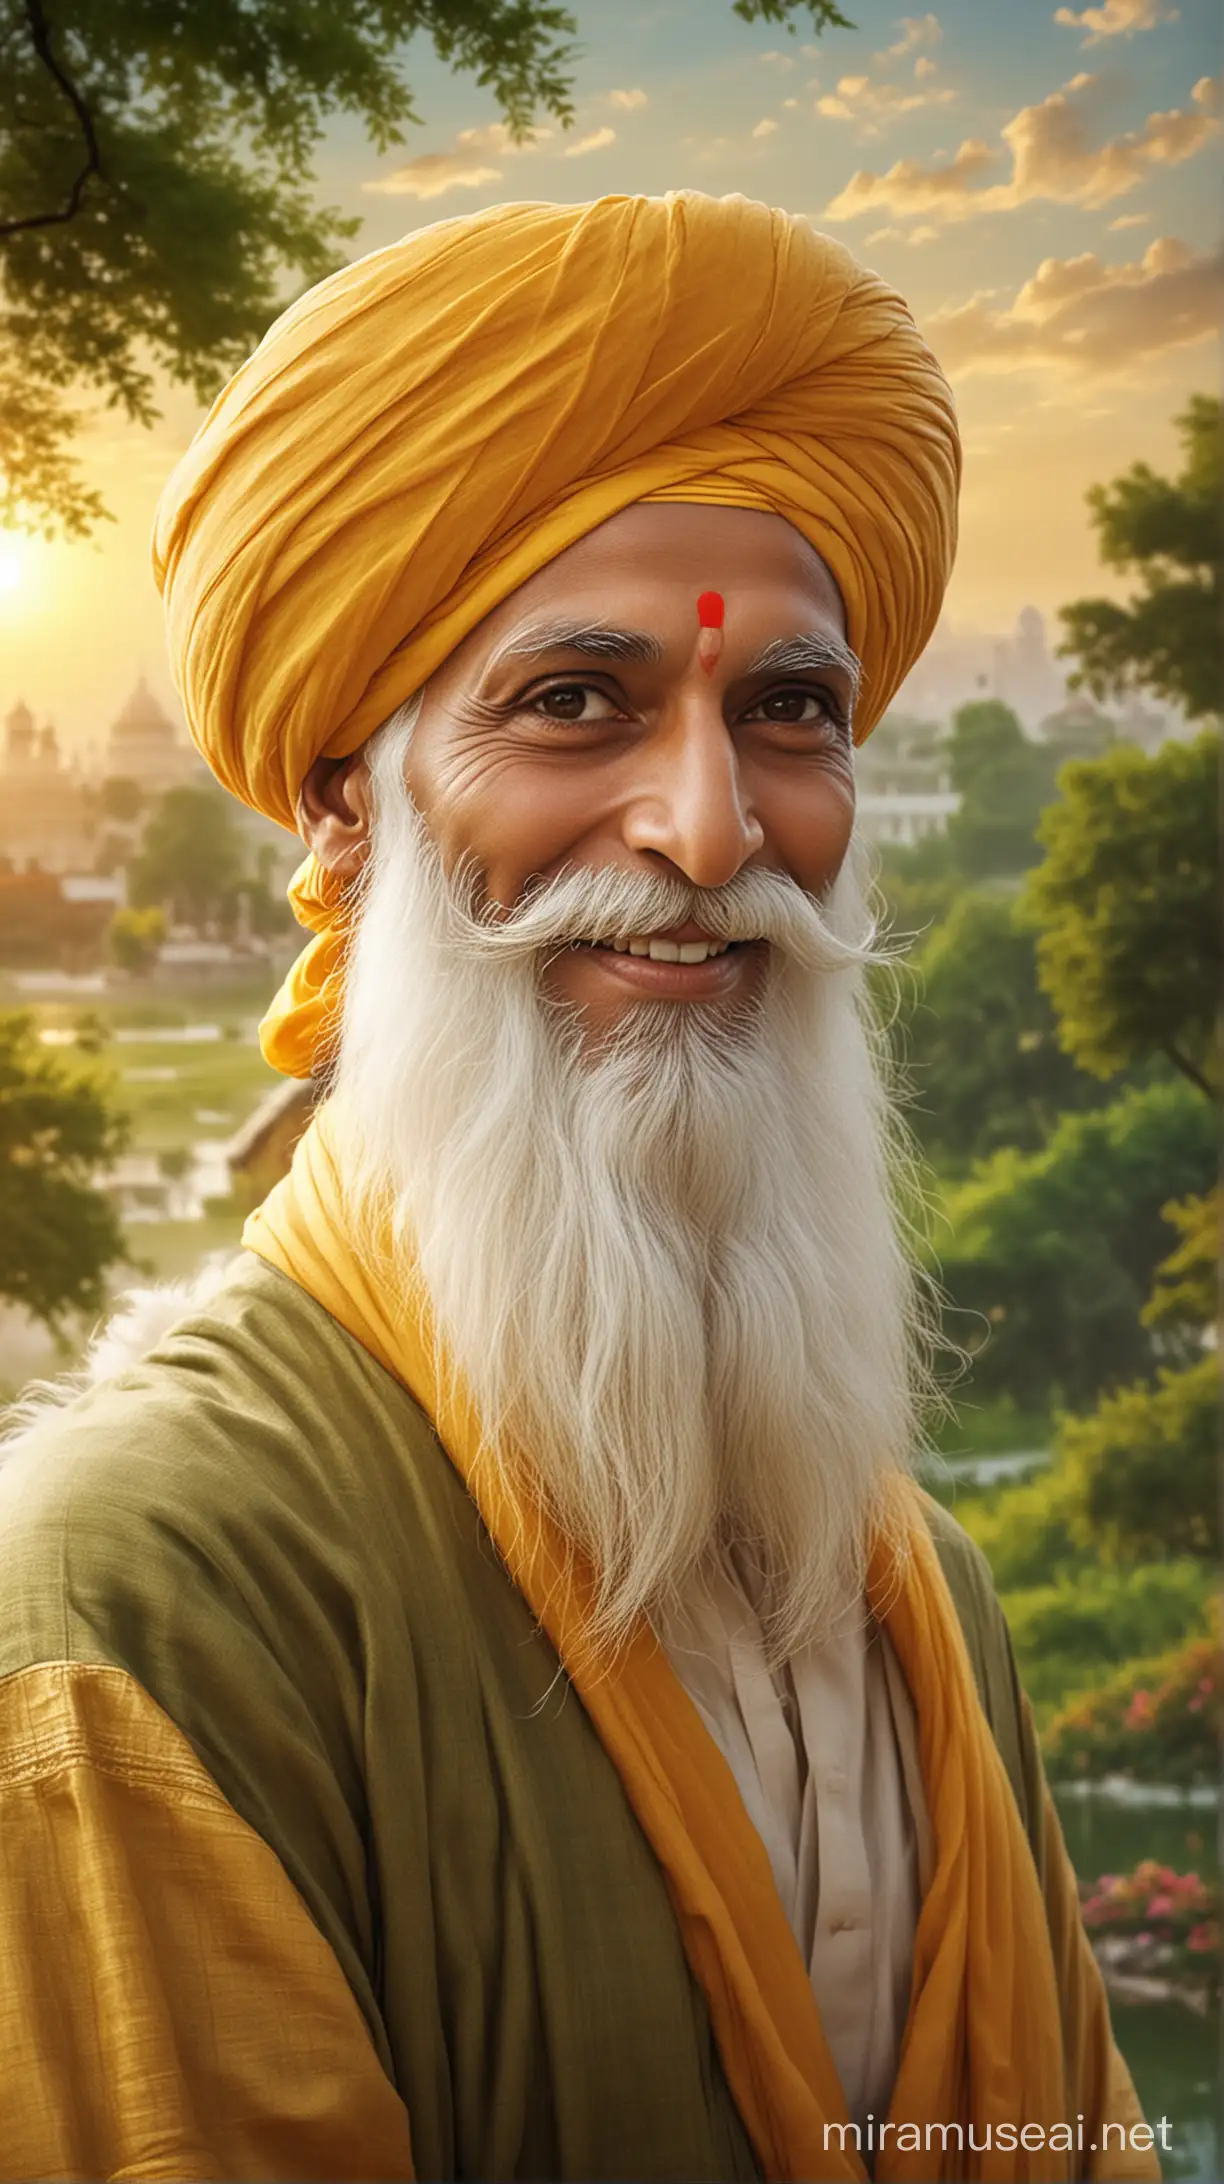 Guru Nanak Dev Ji's face reflects compassion and wisdom, with a serene smile, a flowing beard, and a simple turban. Set against the lush green landscape of Punjab, his teachings of oneness with nature and enlightenment are symbolized by the dawn sky and the presence of the Golden Temple, Harmandir Sahib, representing his legacy of equality and spiritual sanctuary.